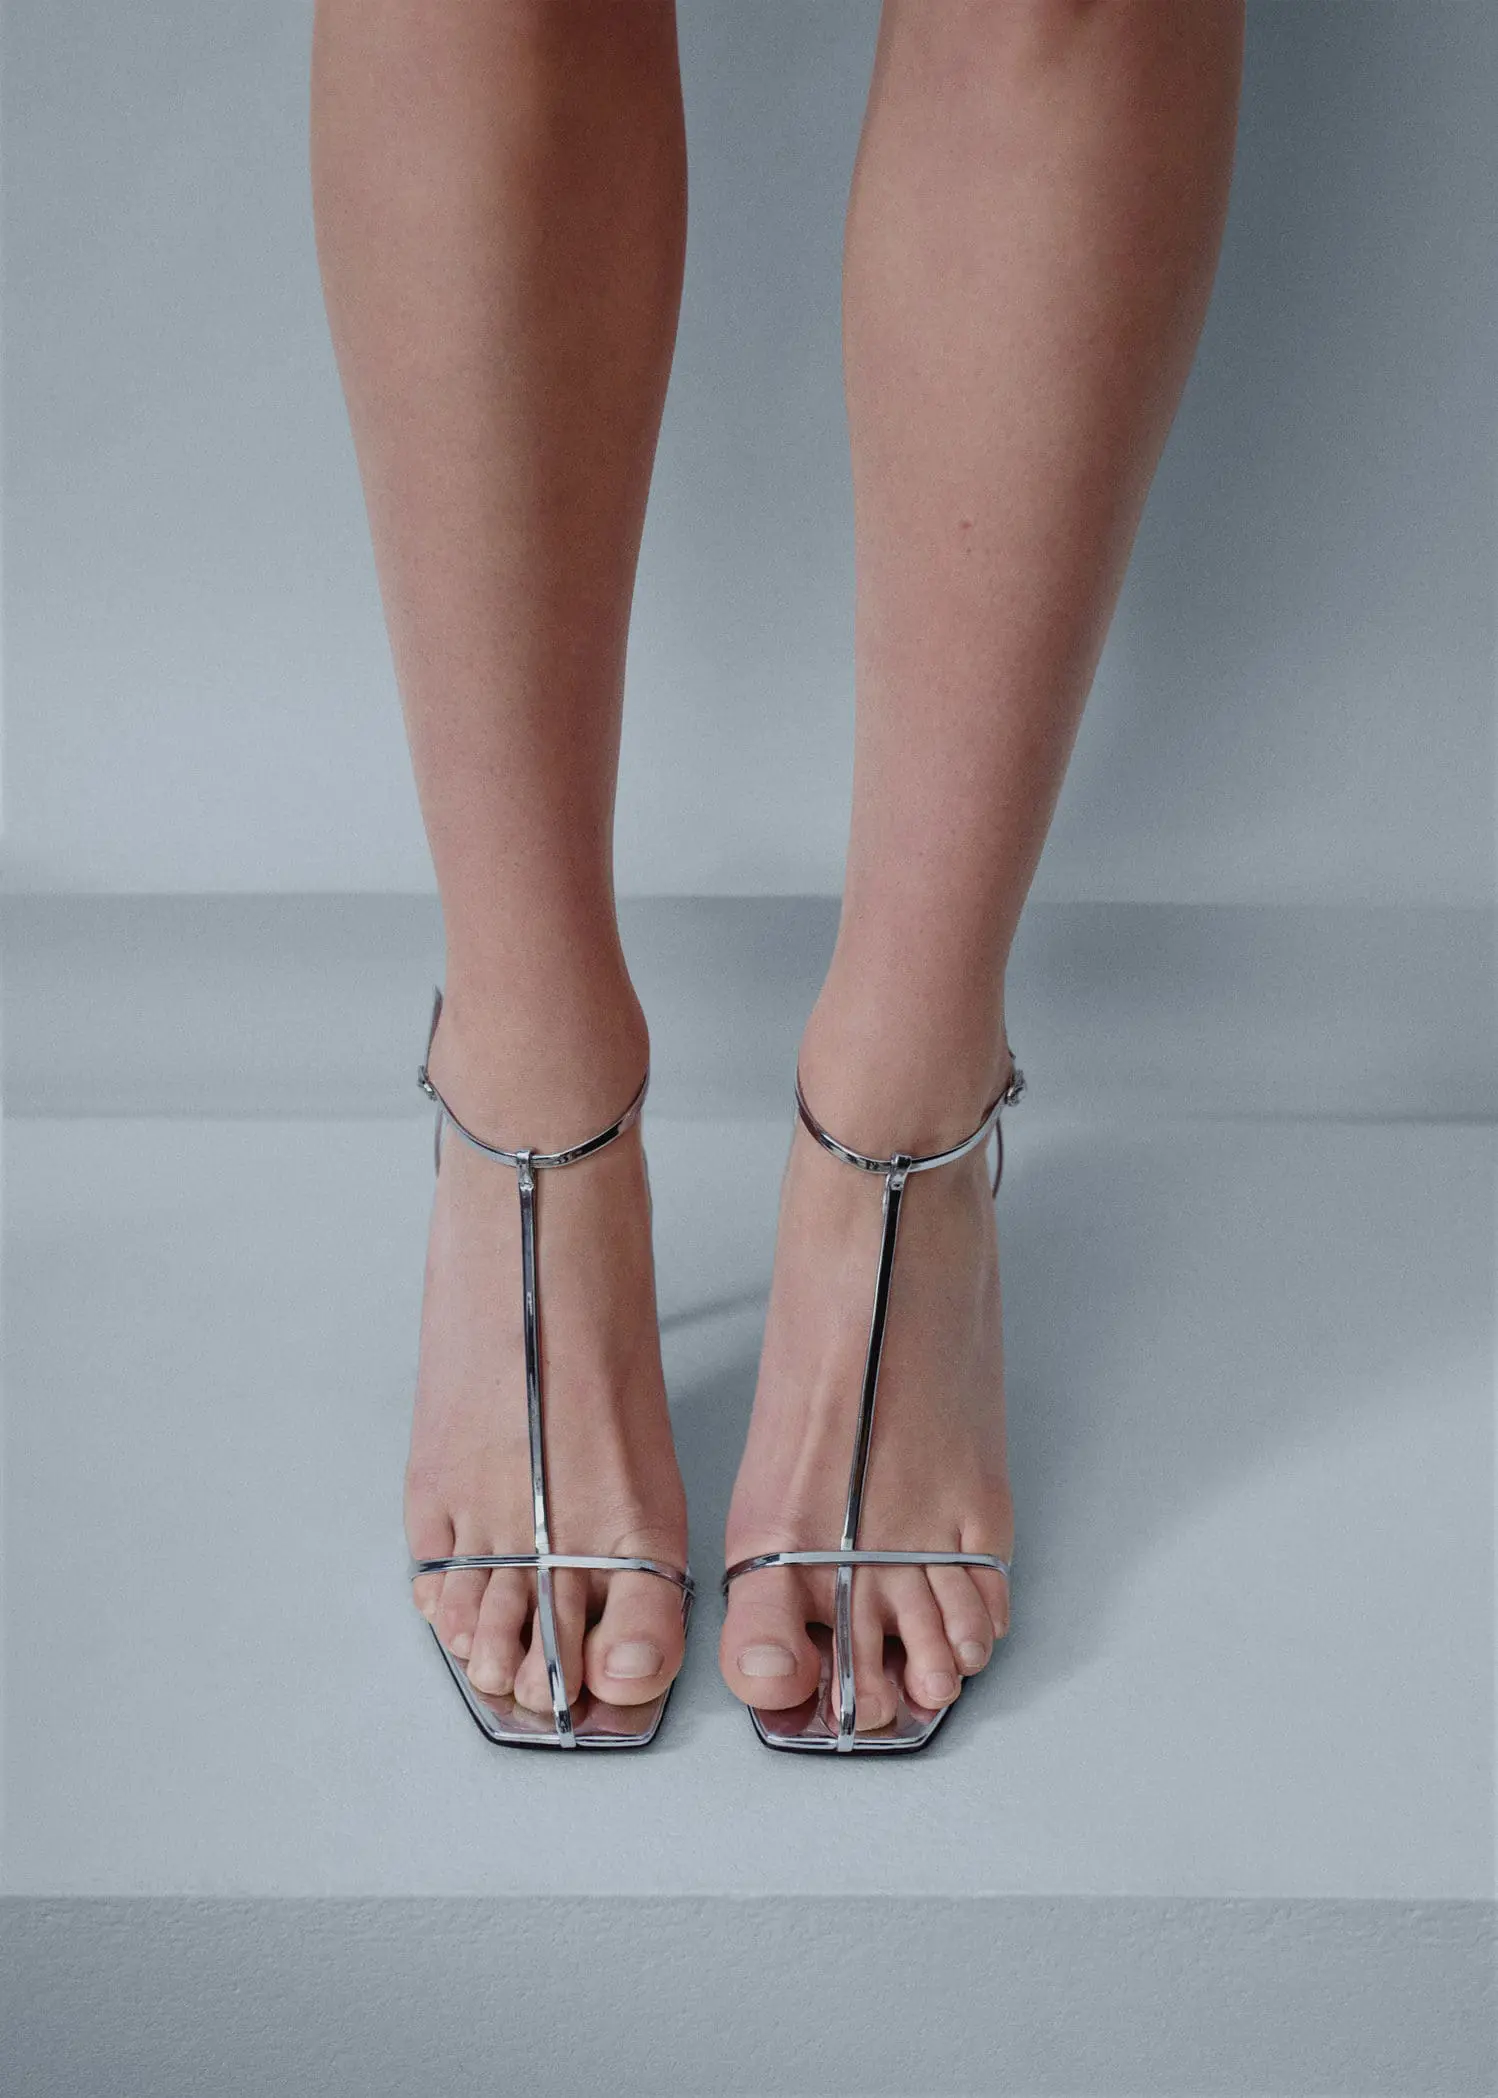 Mango Heeled leather sandals with straps. a pair of feet wearing high heel sandals. 